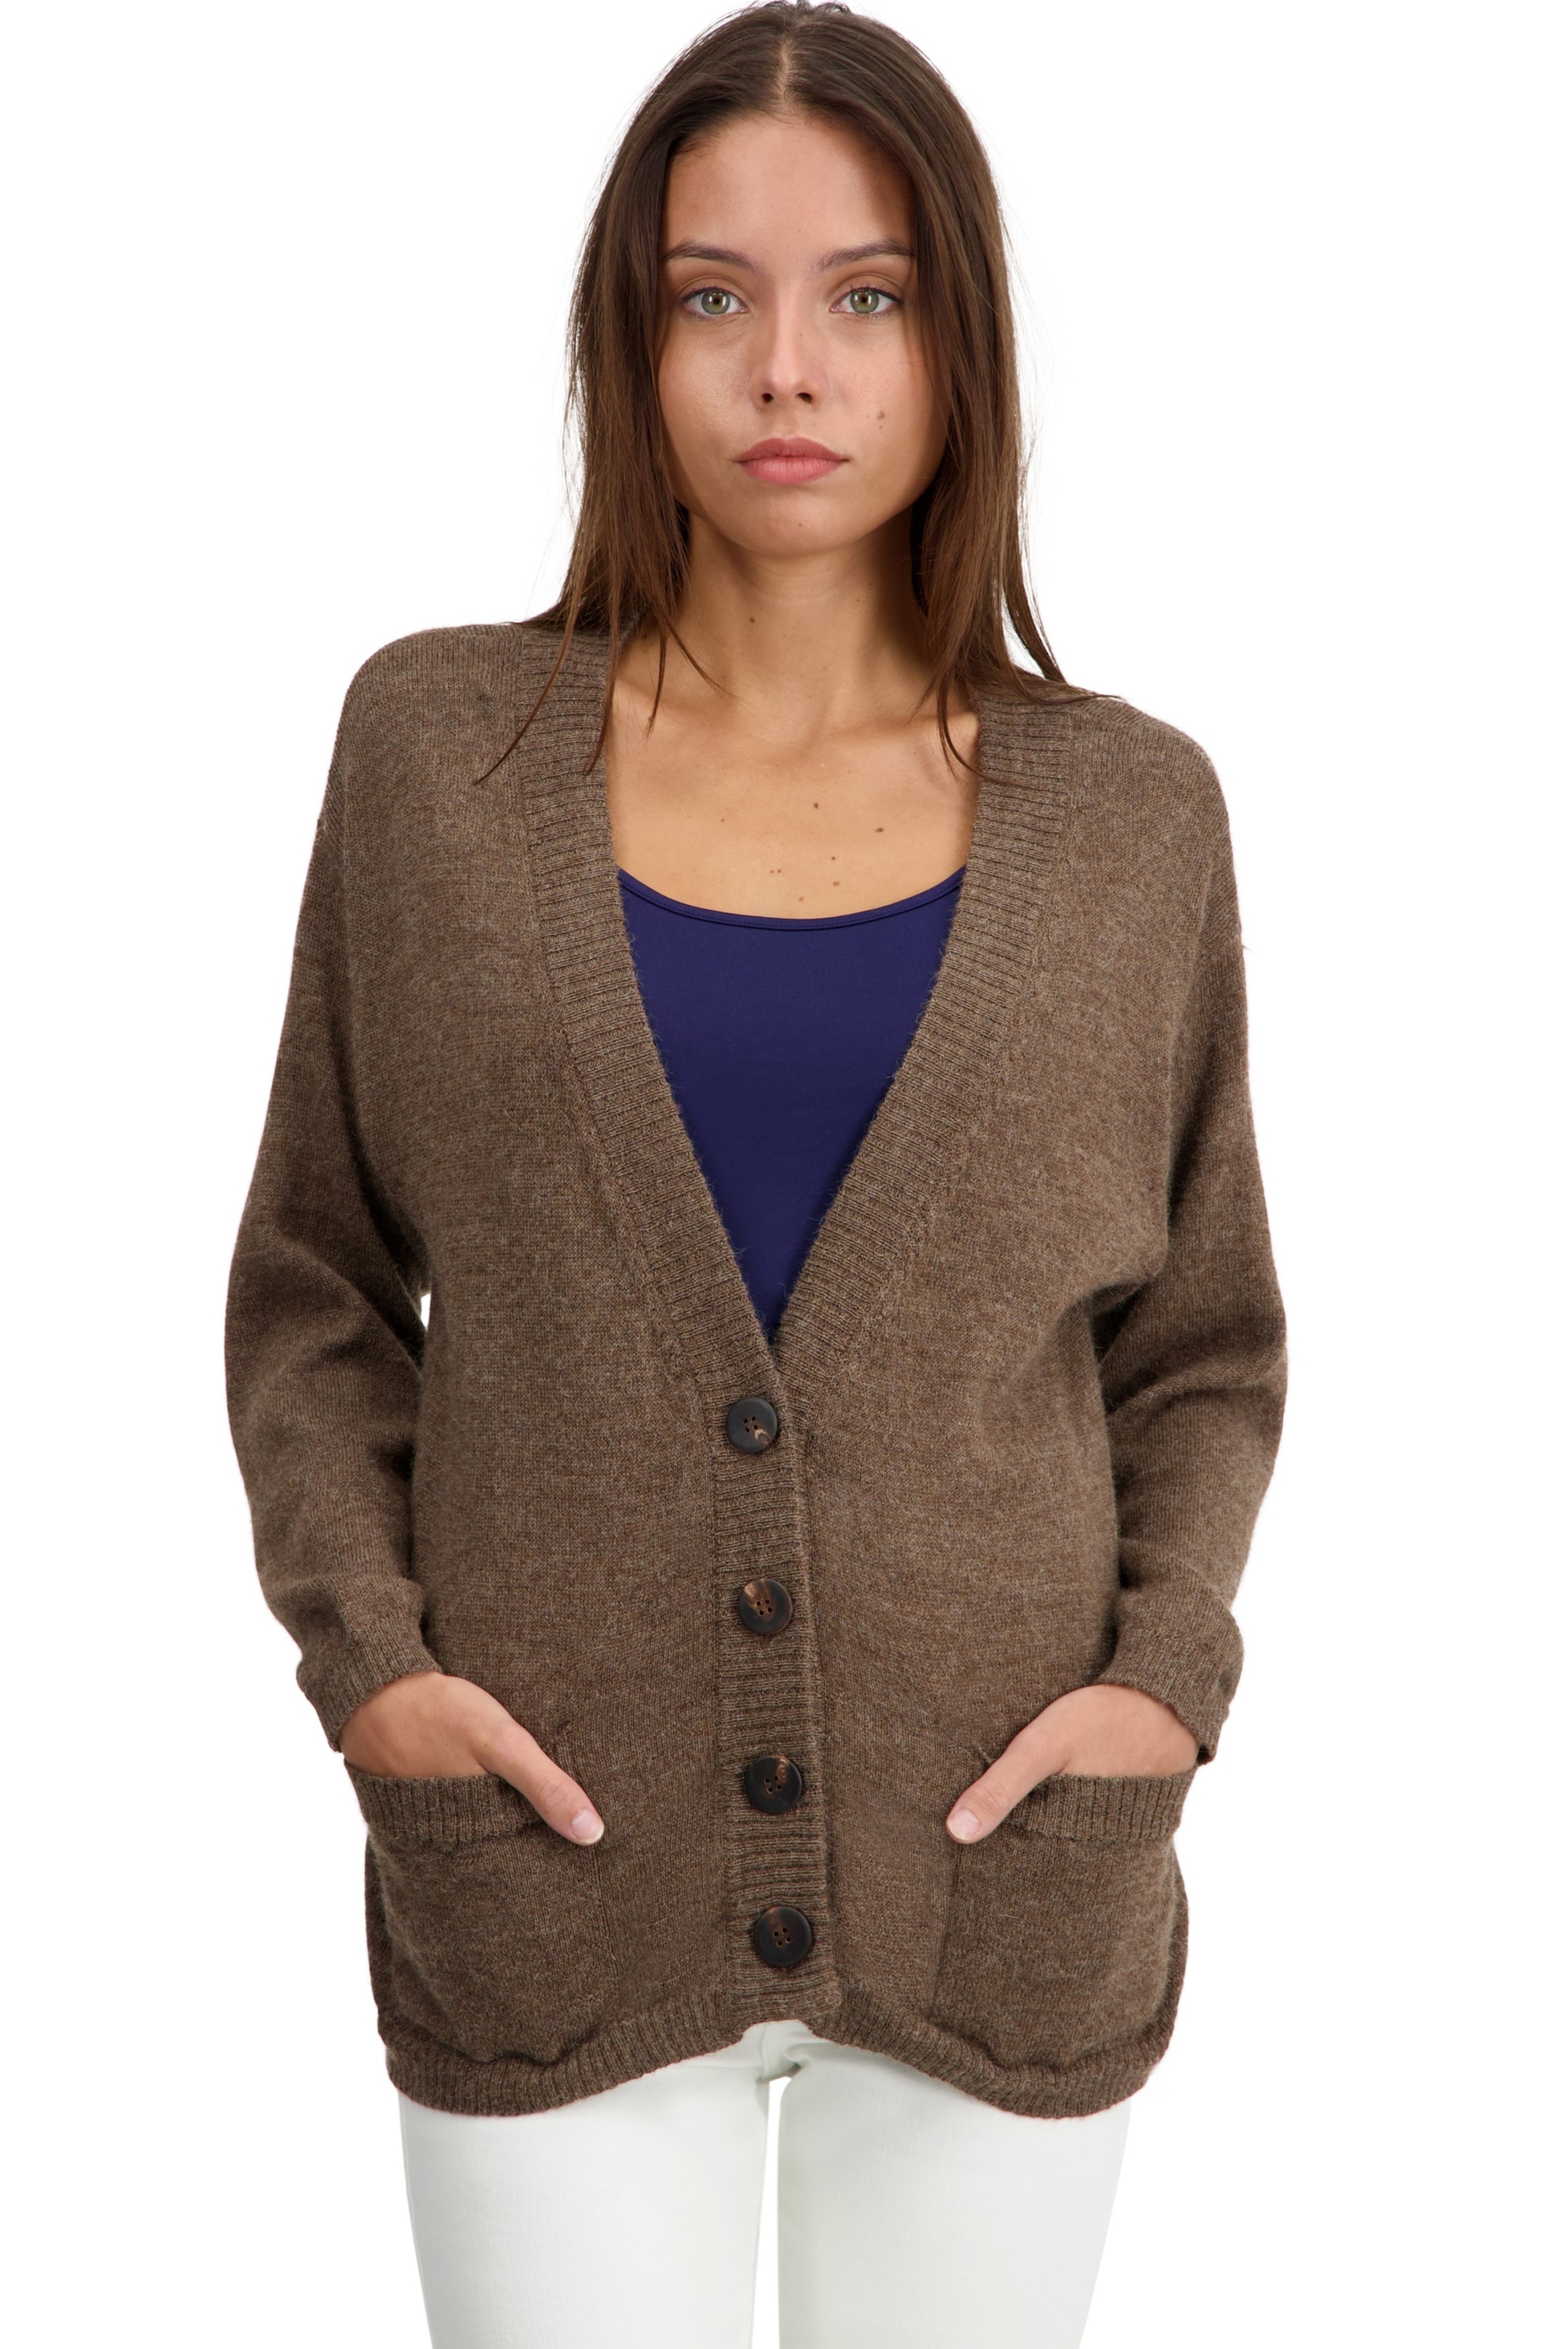 Baby Alpaca ladies cardigans toulouse natural s